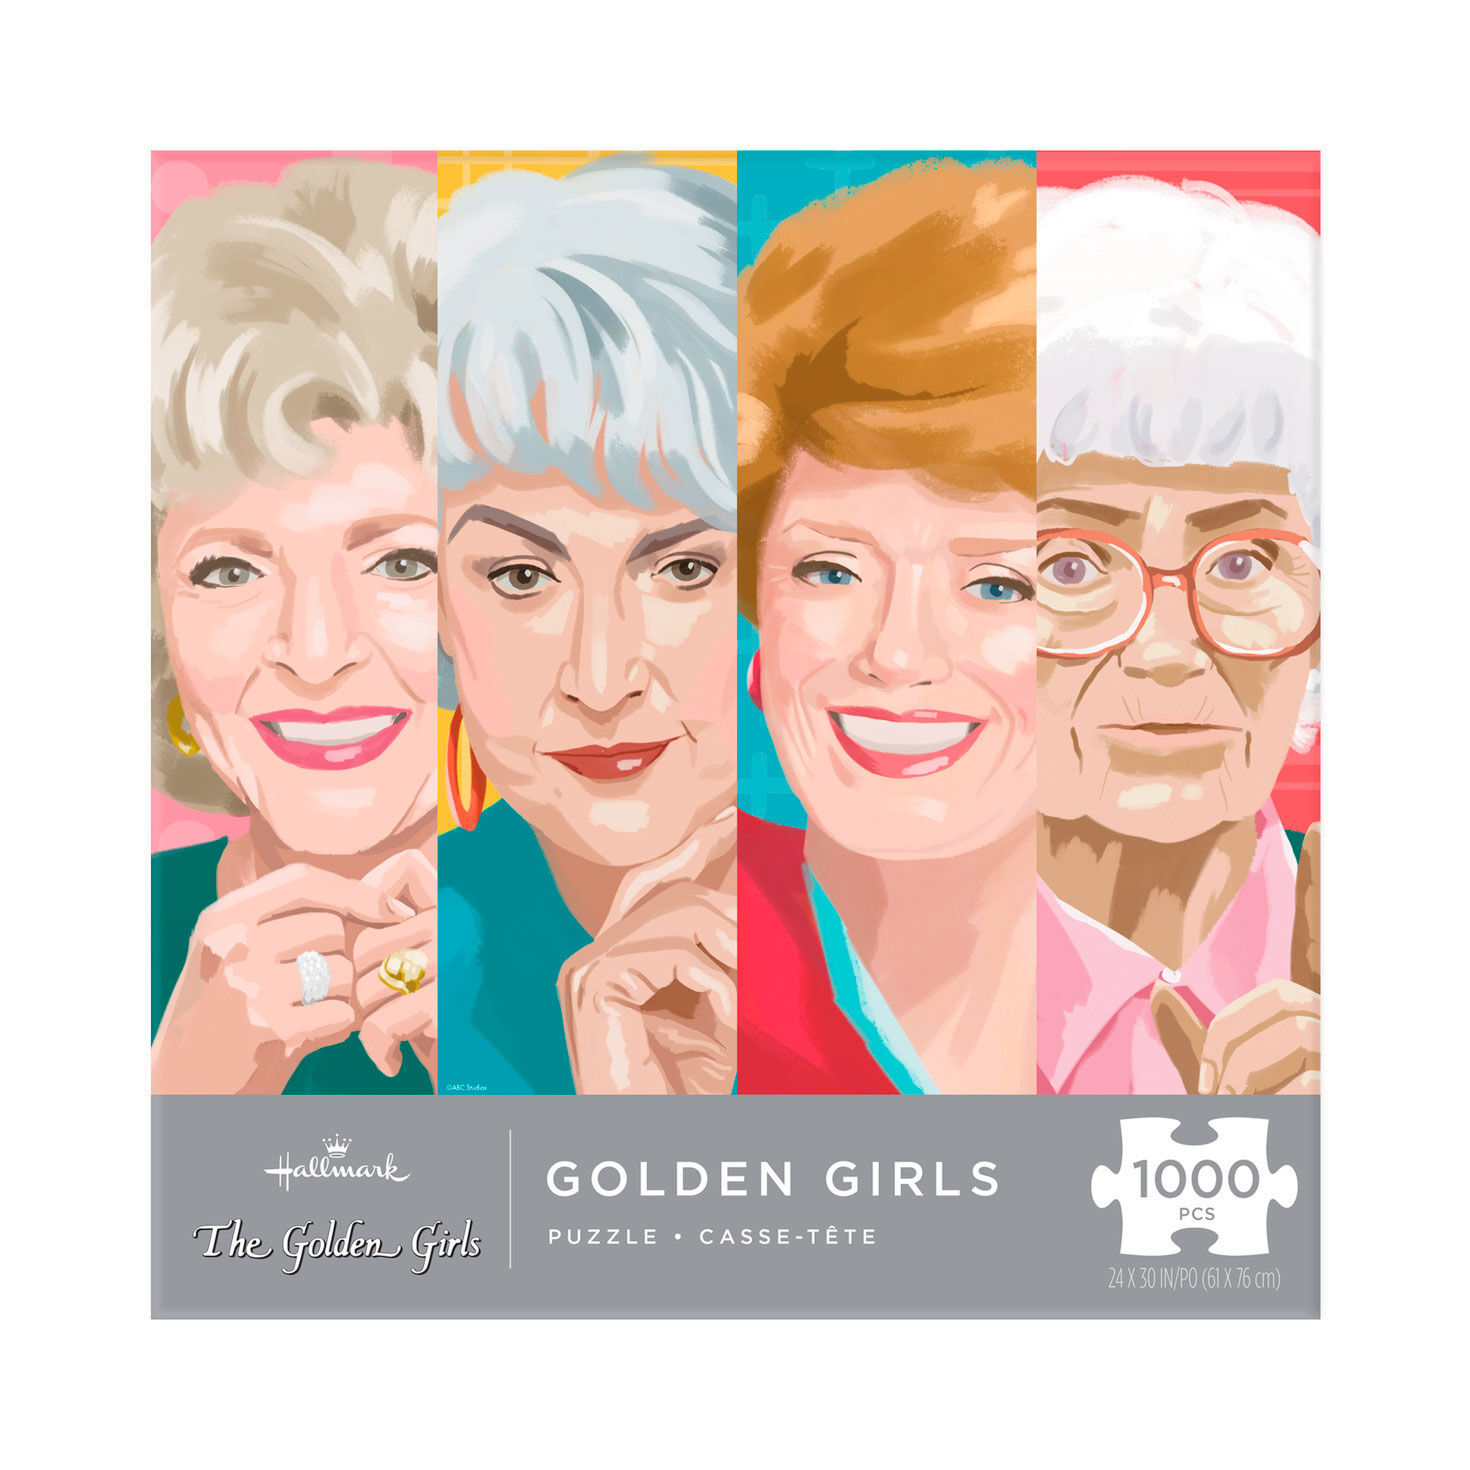 The Golden Girls 1,000-Piece Jigsaw Puzzle for only USD 19.99 | Hallmark